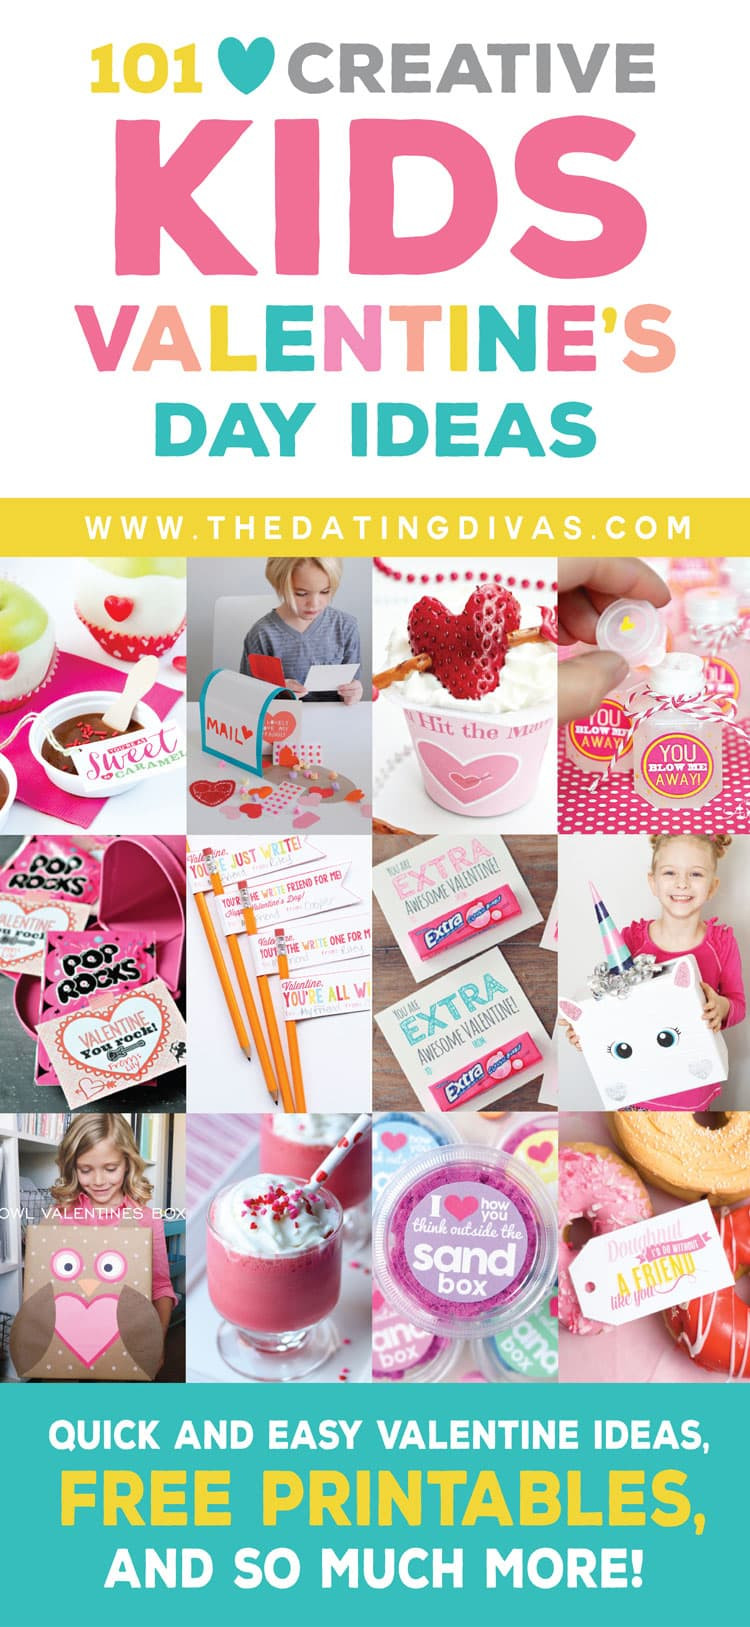 Valentines Day Ideas For Kids
 100 Kids Valentine s Day Ideas Treats Gifts & More